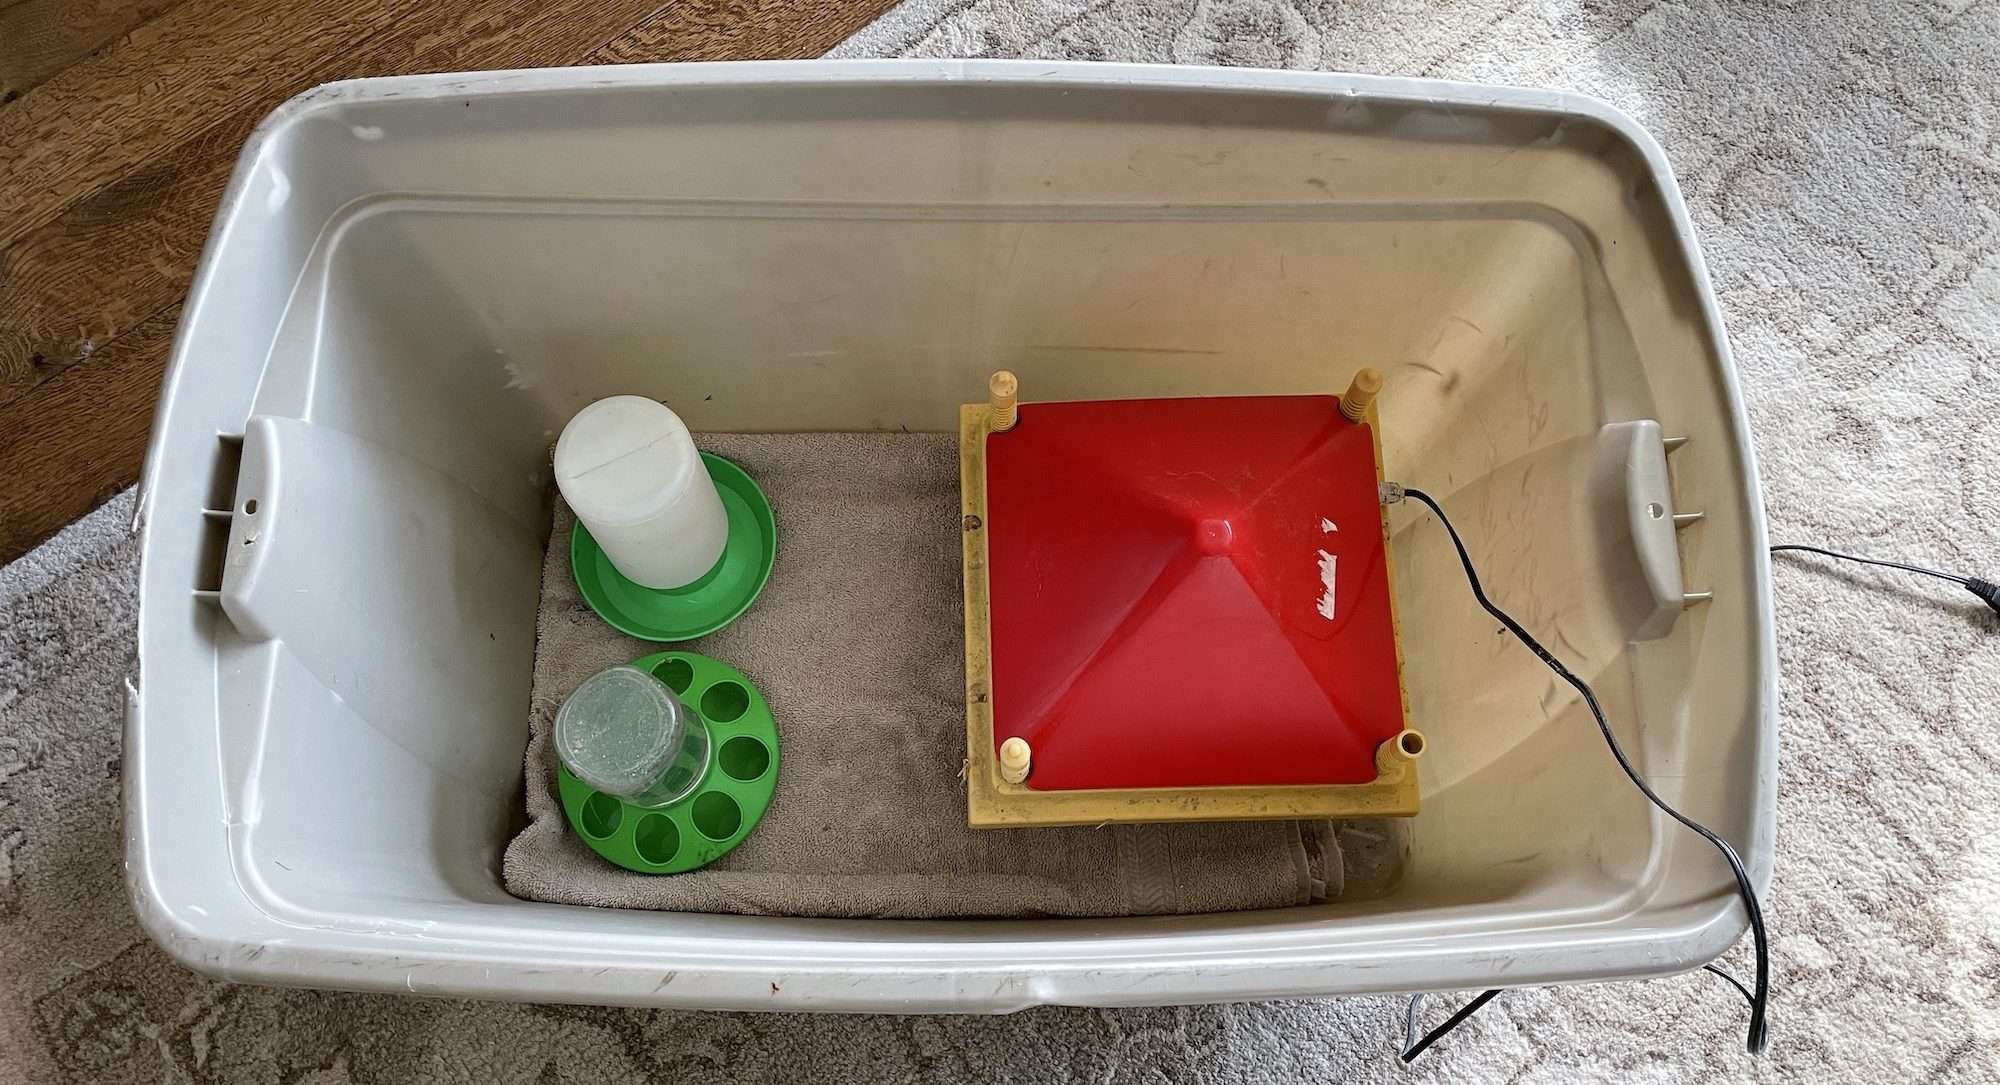 Simple brooder set up in a plastic tub